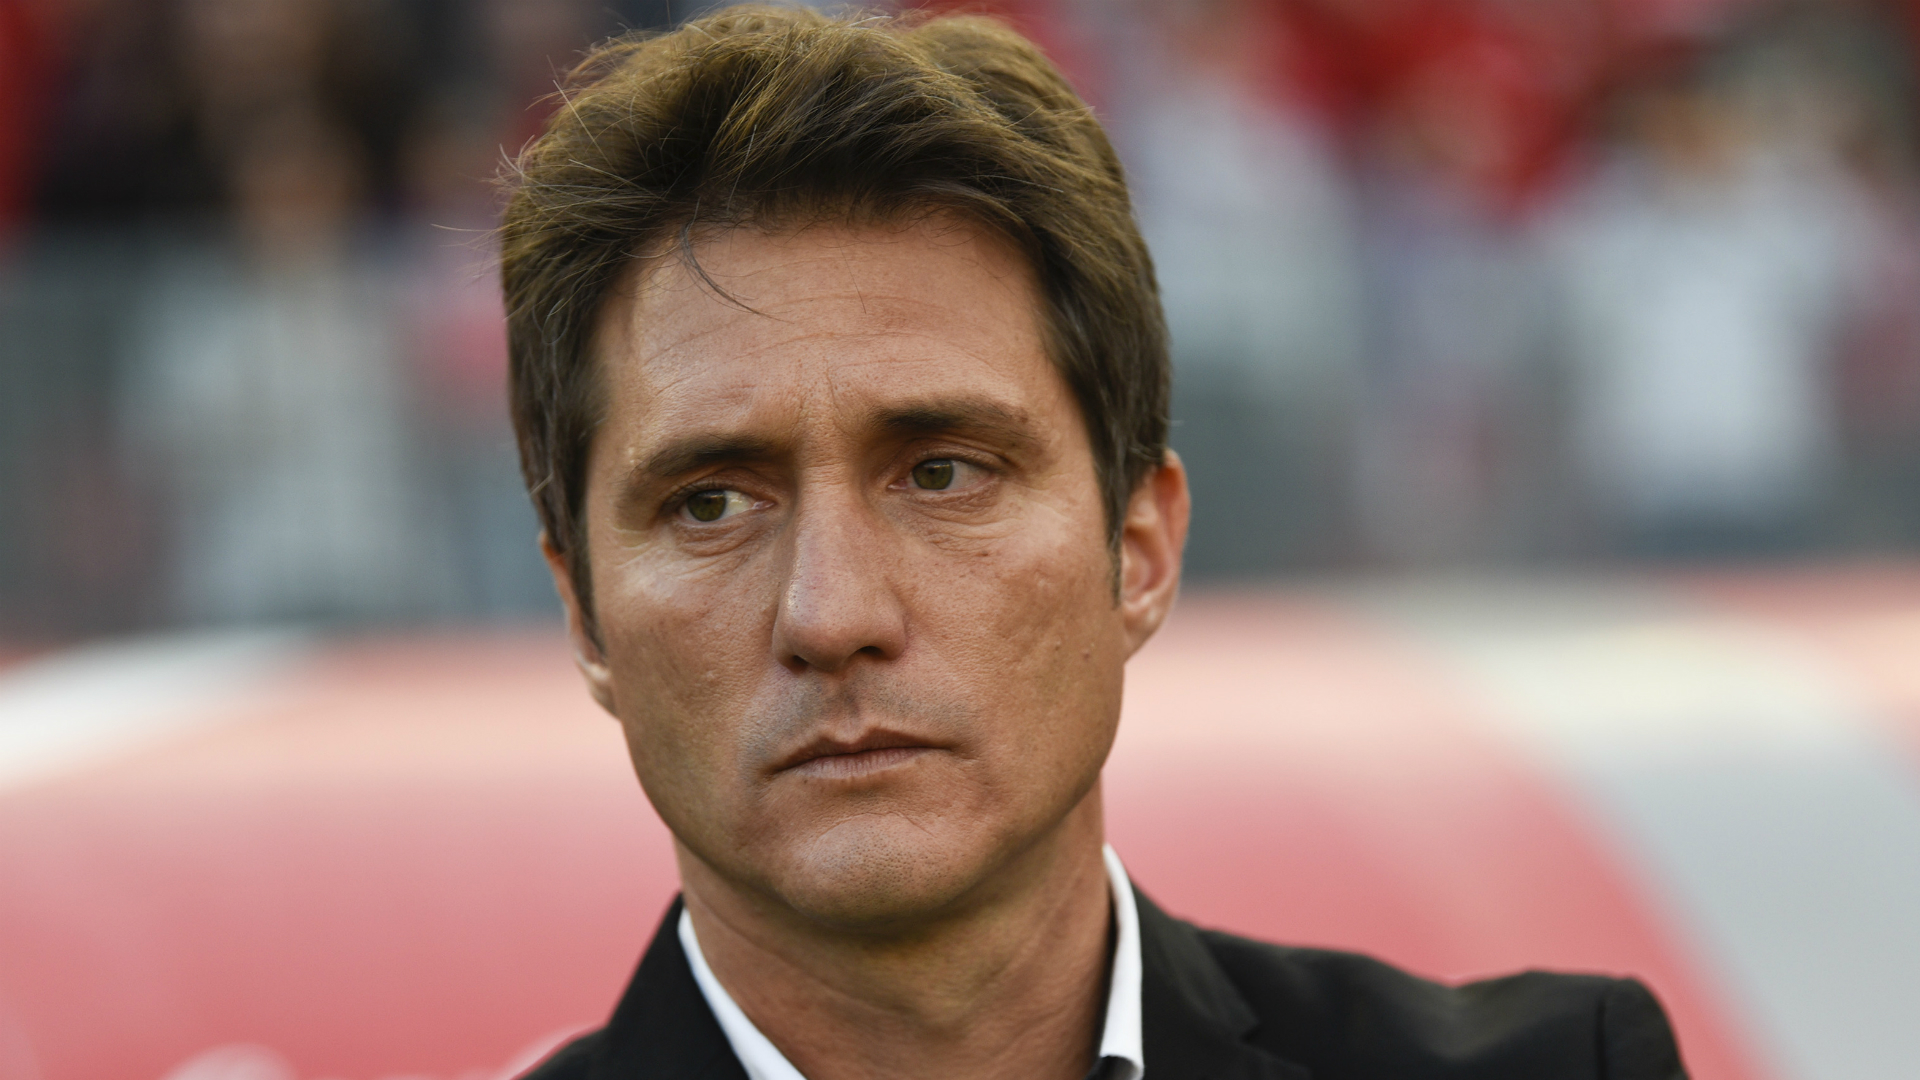 Argentine football missed the chance to showcase itself with the postponed Copa Libertadores final, says Guillermo Barros Schelotto.